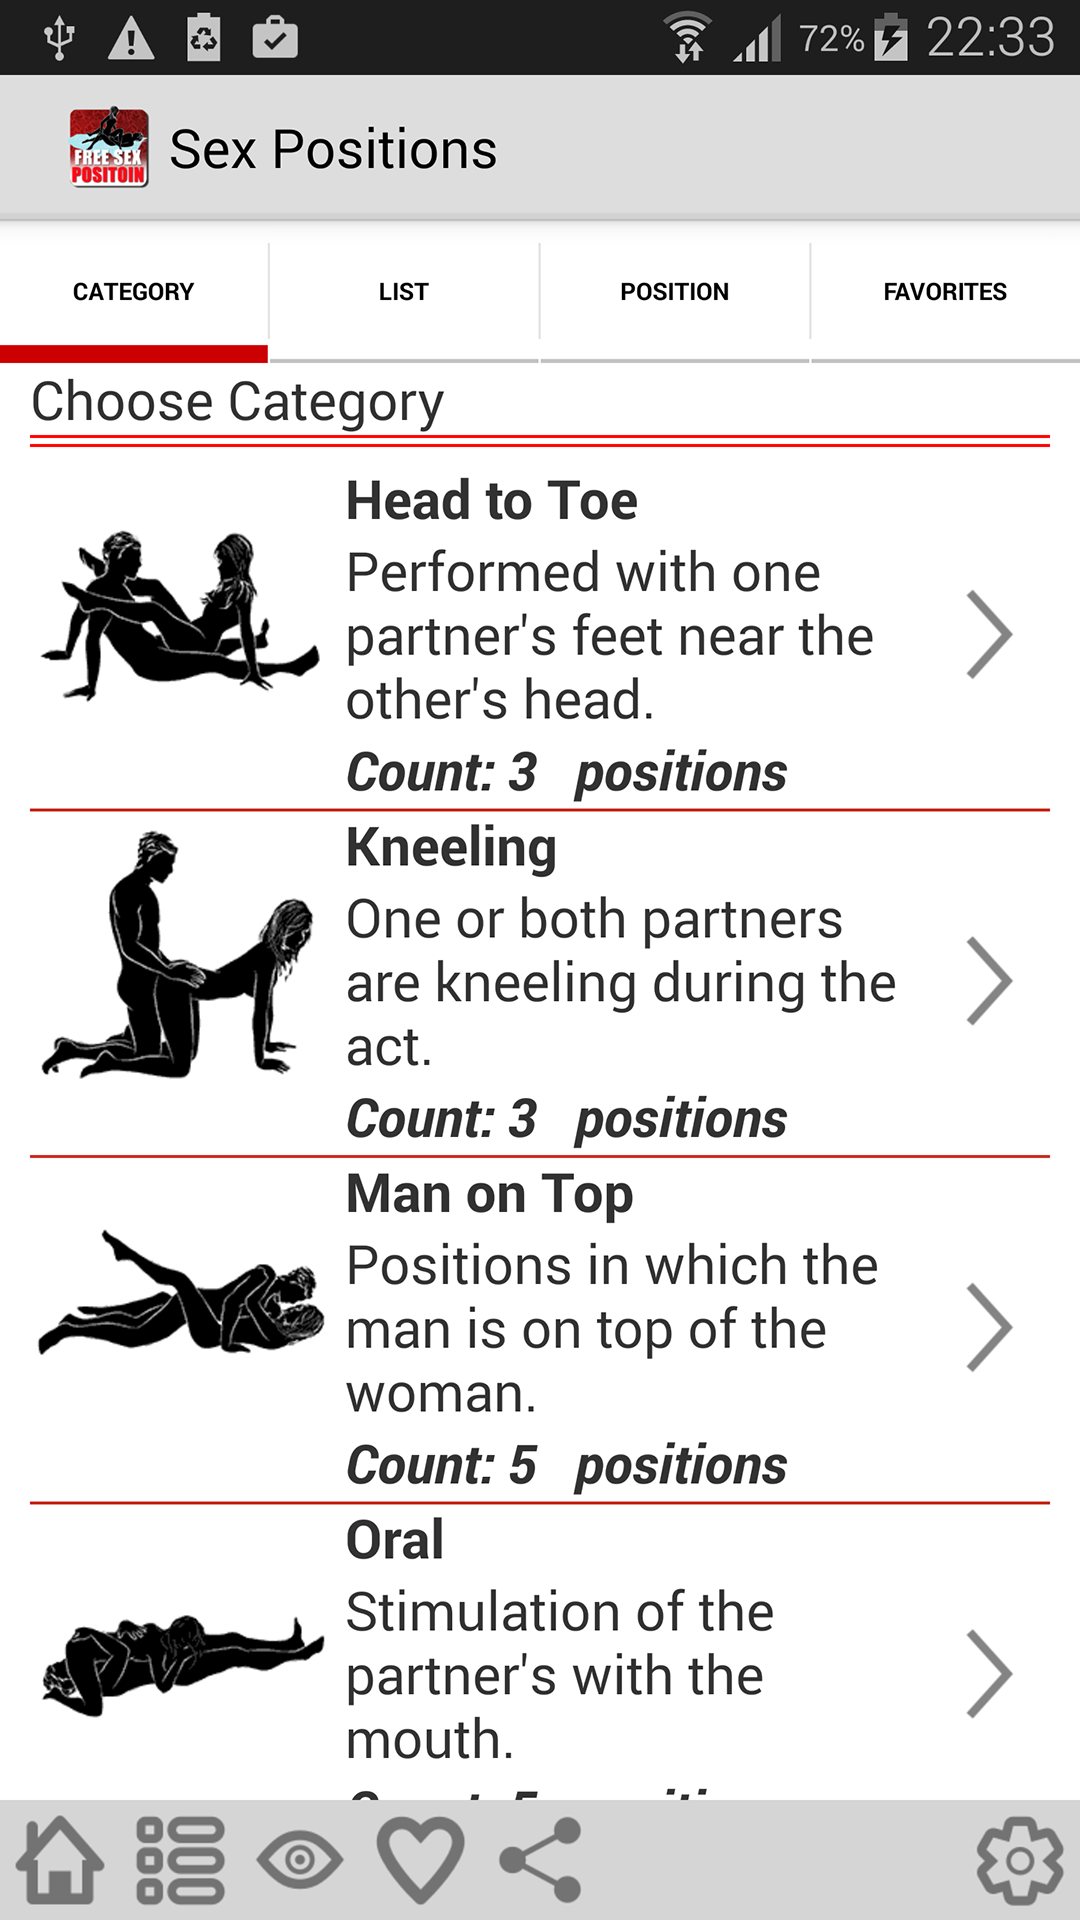 bill coates recommends all sex positions with names pic